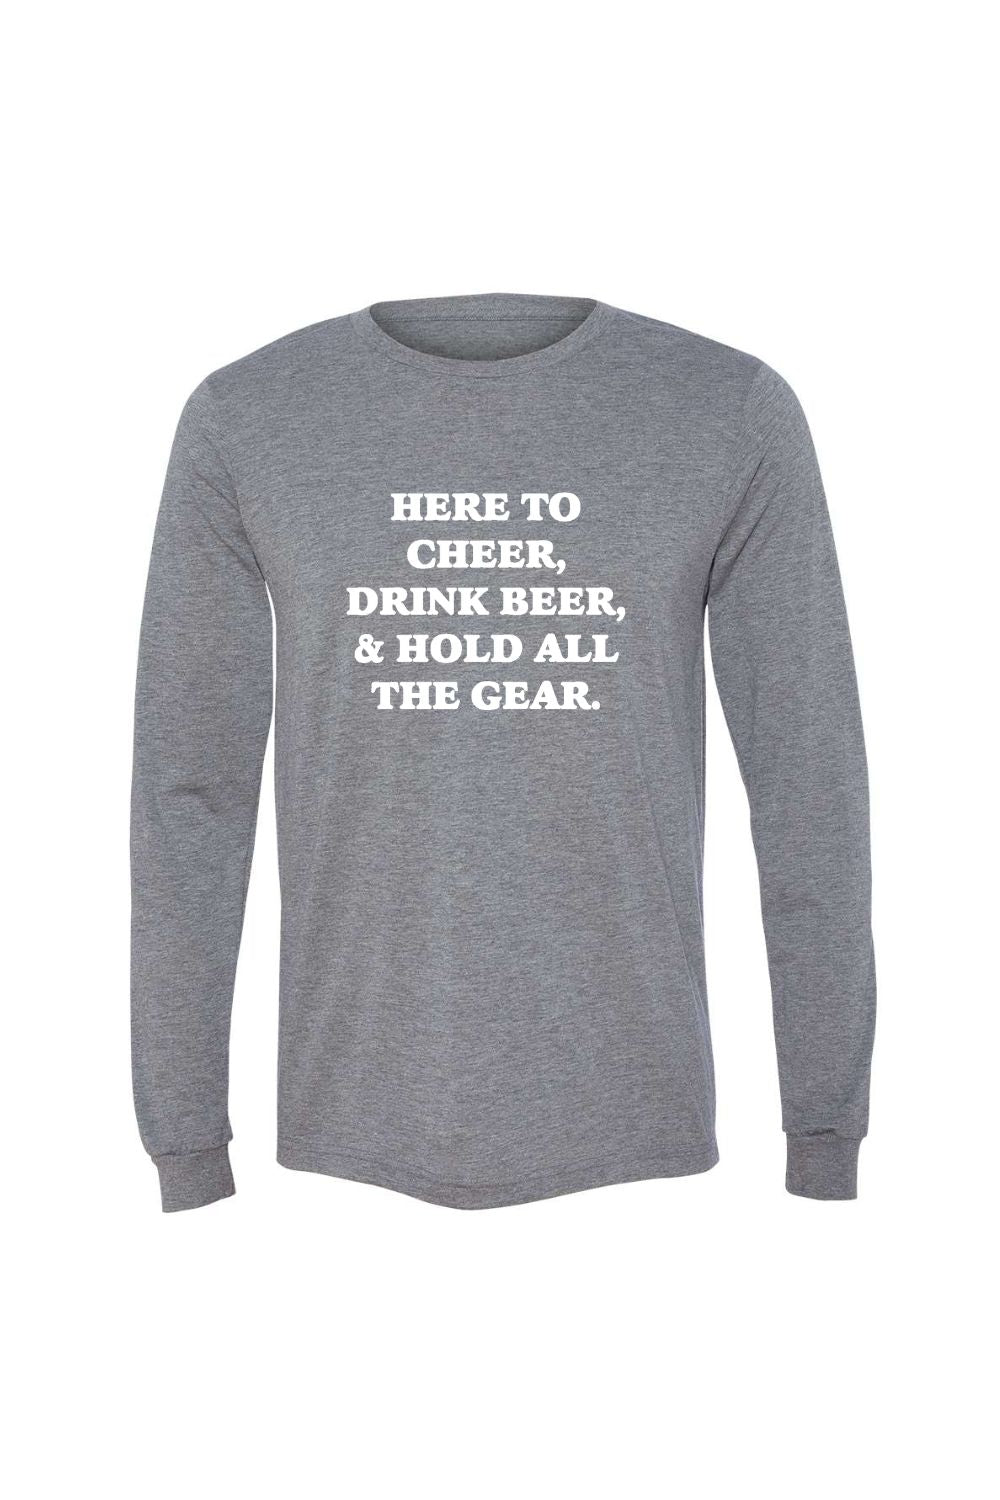 Here to Cheer, Drink Beer, Hold all the Gear Long Sleeve